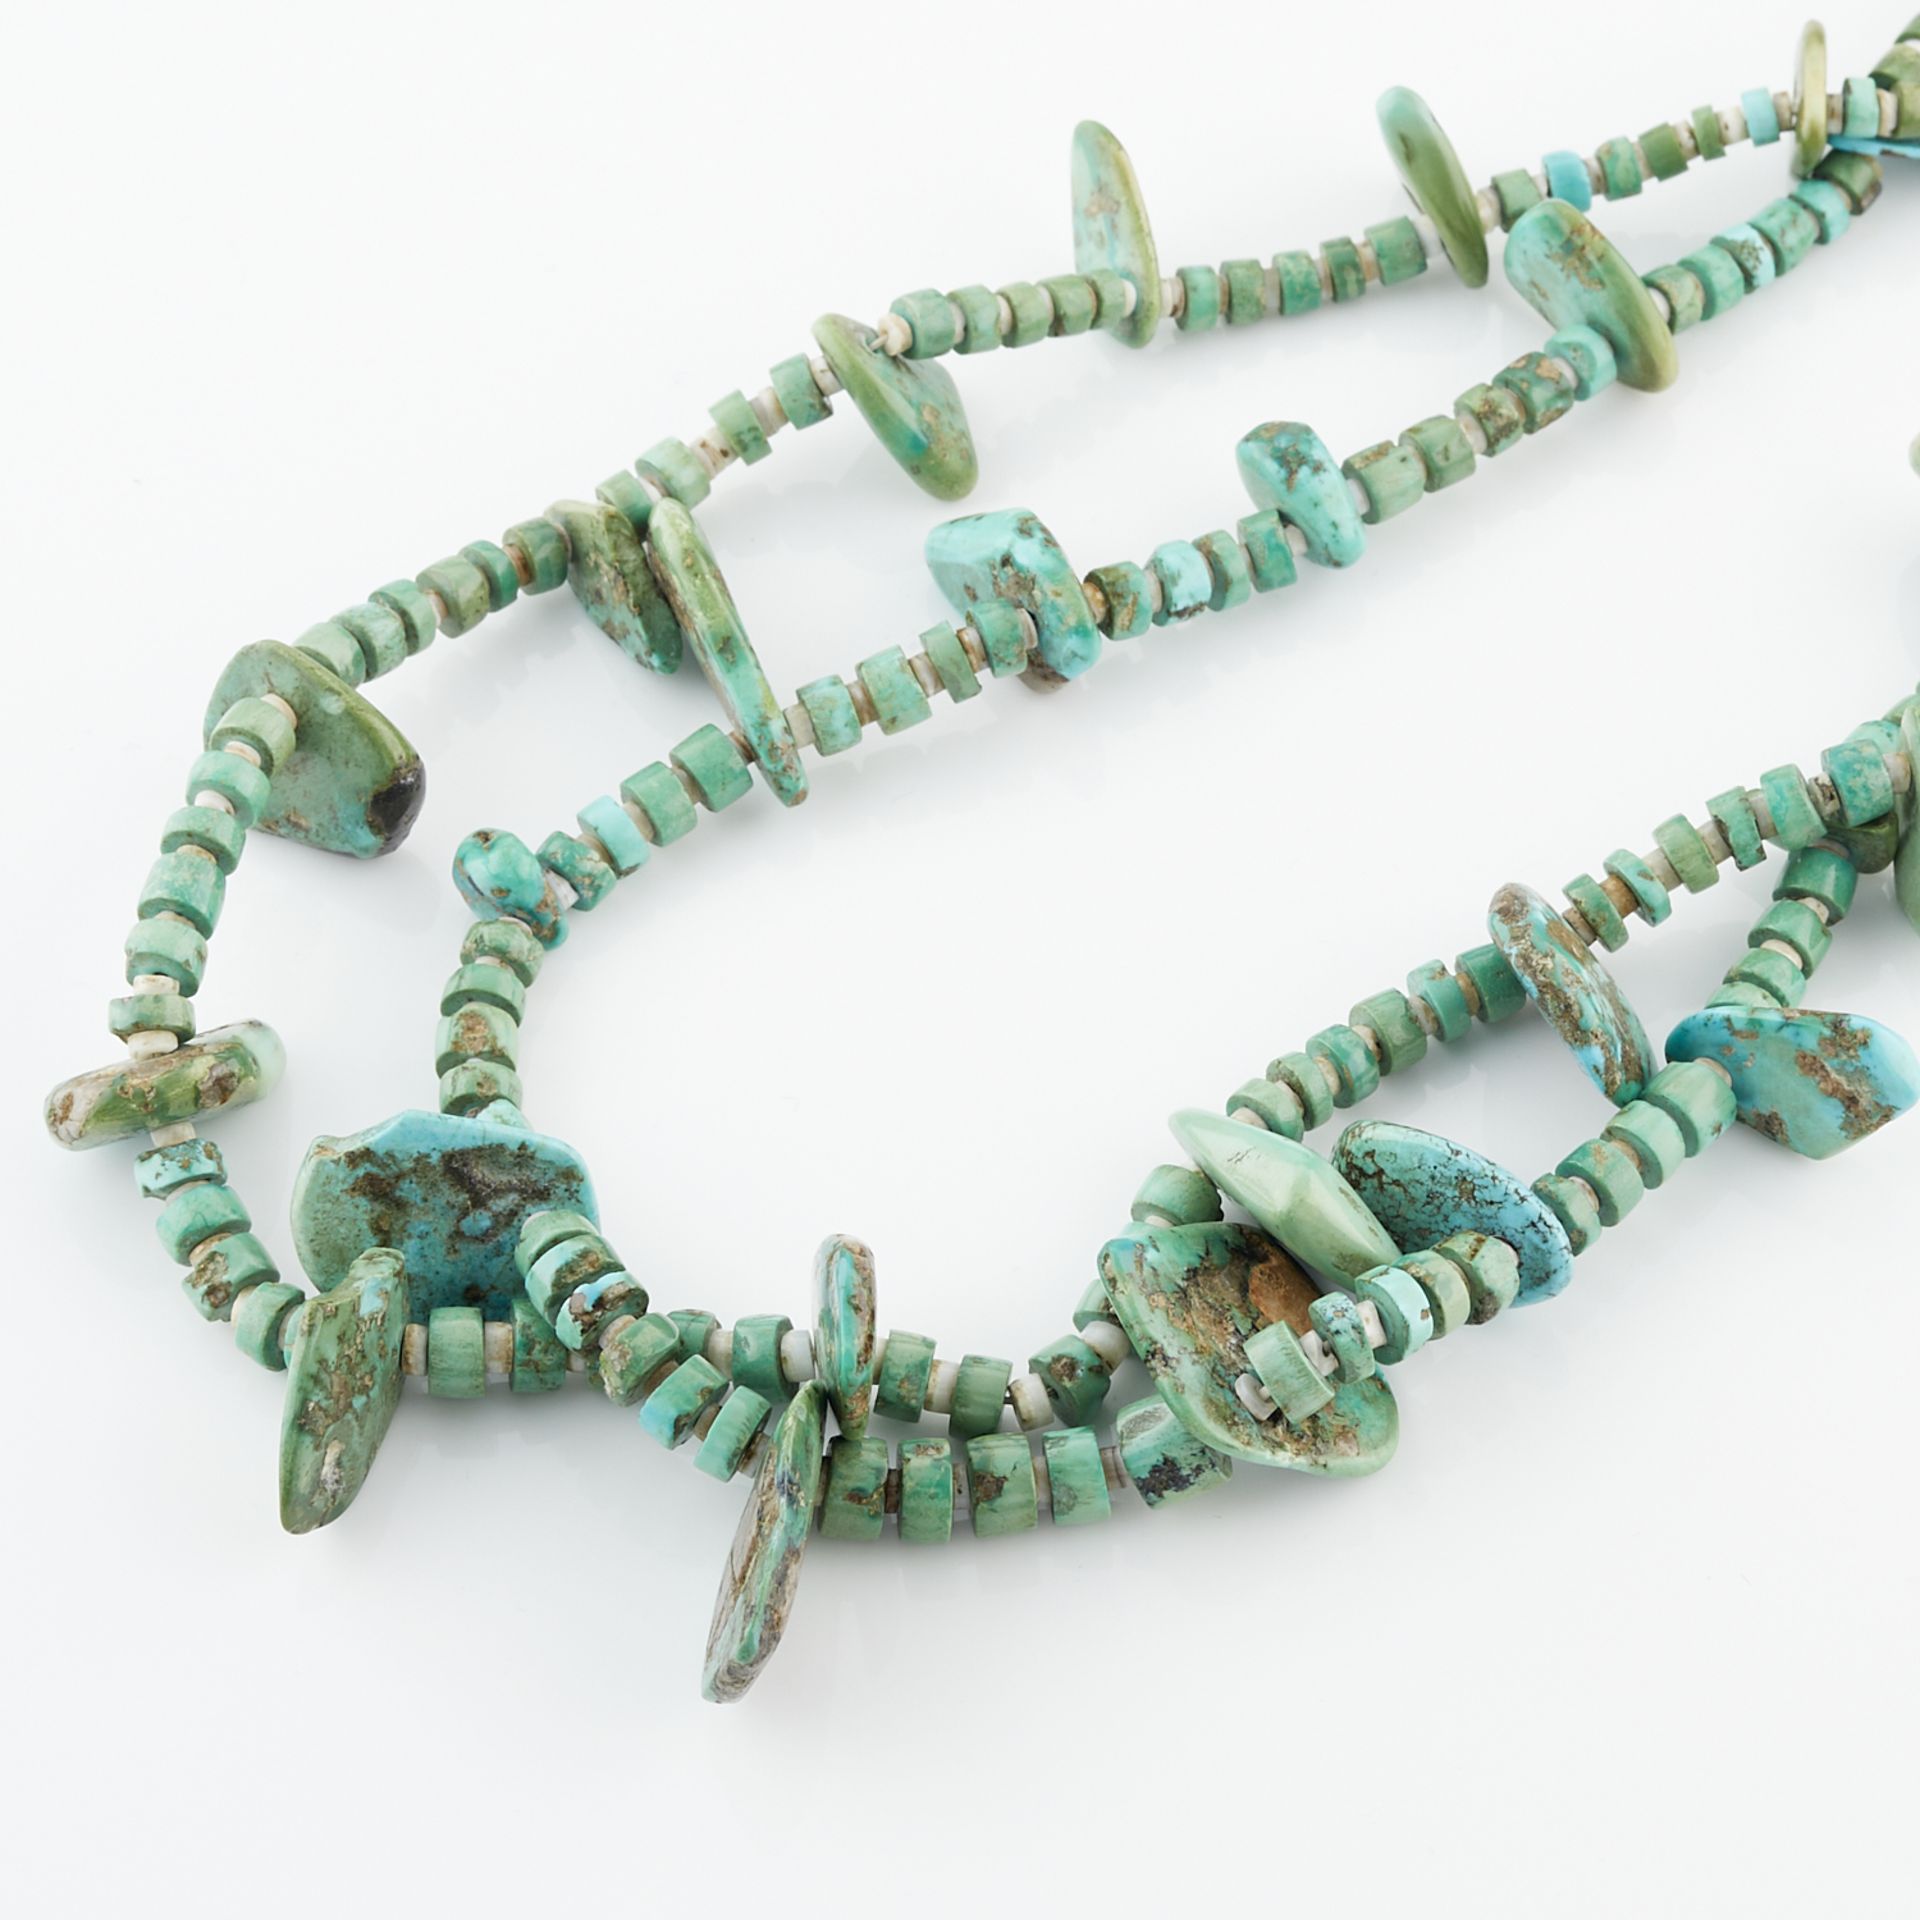 Two Strand Turquoise Heishi Necklace - Image 5 of 6